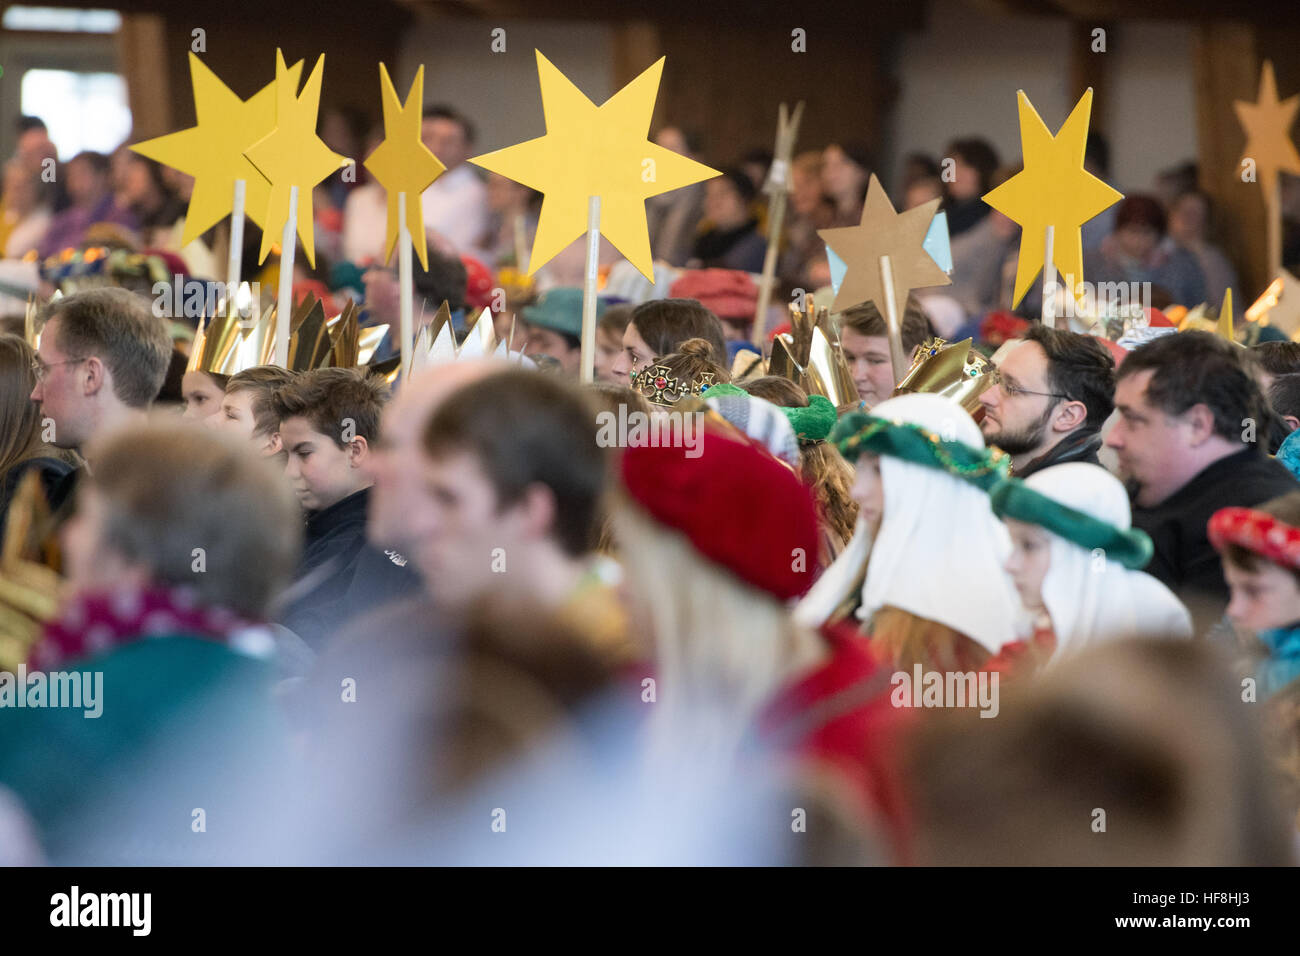 Star singers (also known as epiphany singers) take part in the opening ceremony of the nationwide German star singing action in Neumarkt in der Oberpfalz, Germany, 29 December 2016. Star singers travel from house to house and ask for donations to charitable causes across the world every 6th January. Photo: Armin Weigel/dpa Stock Photo